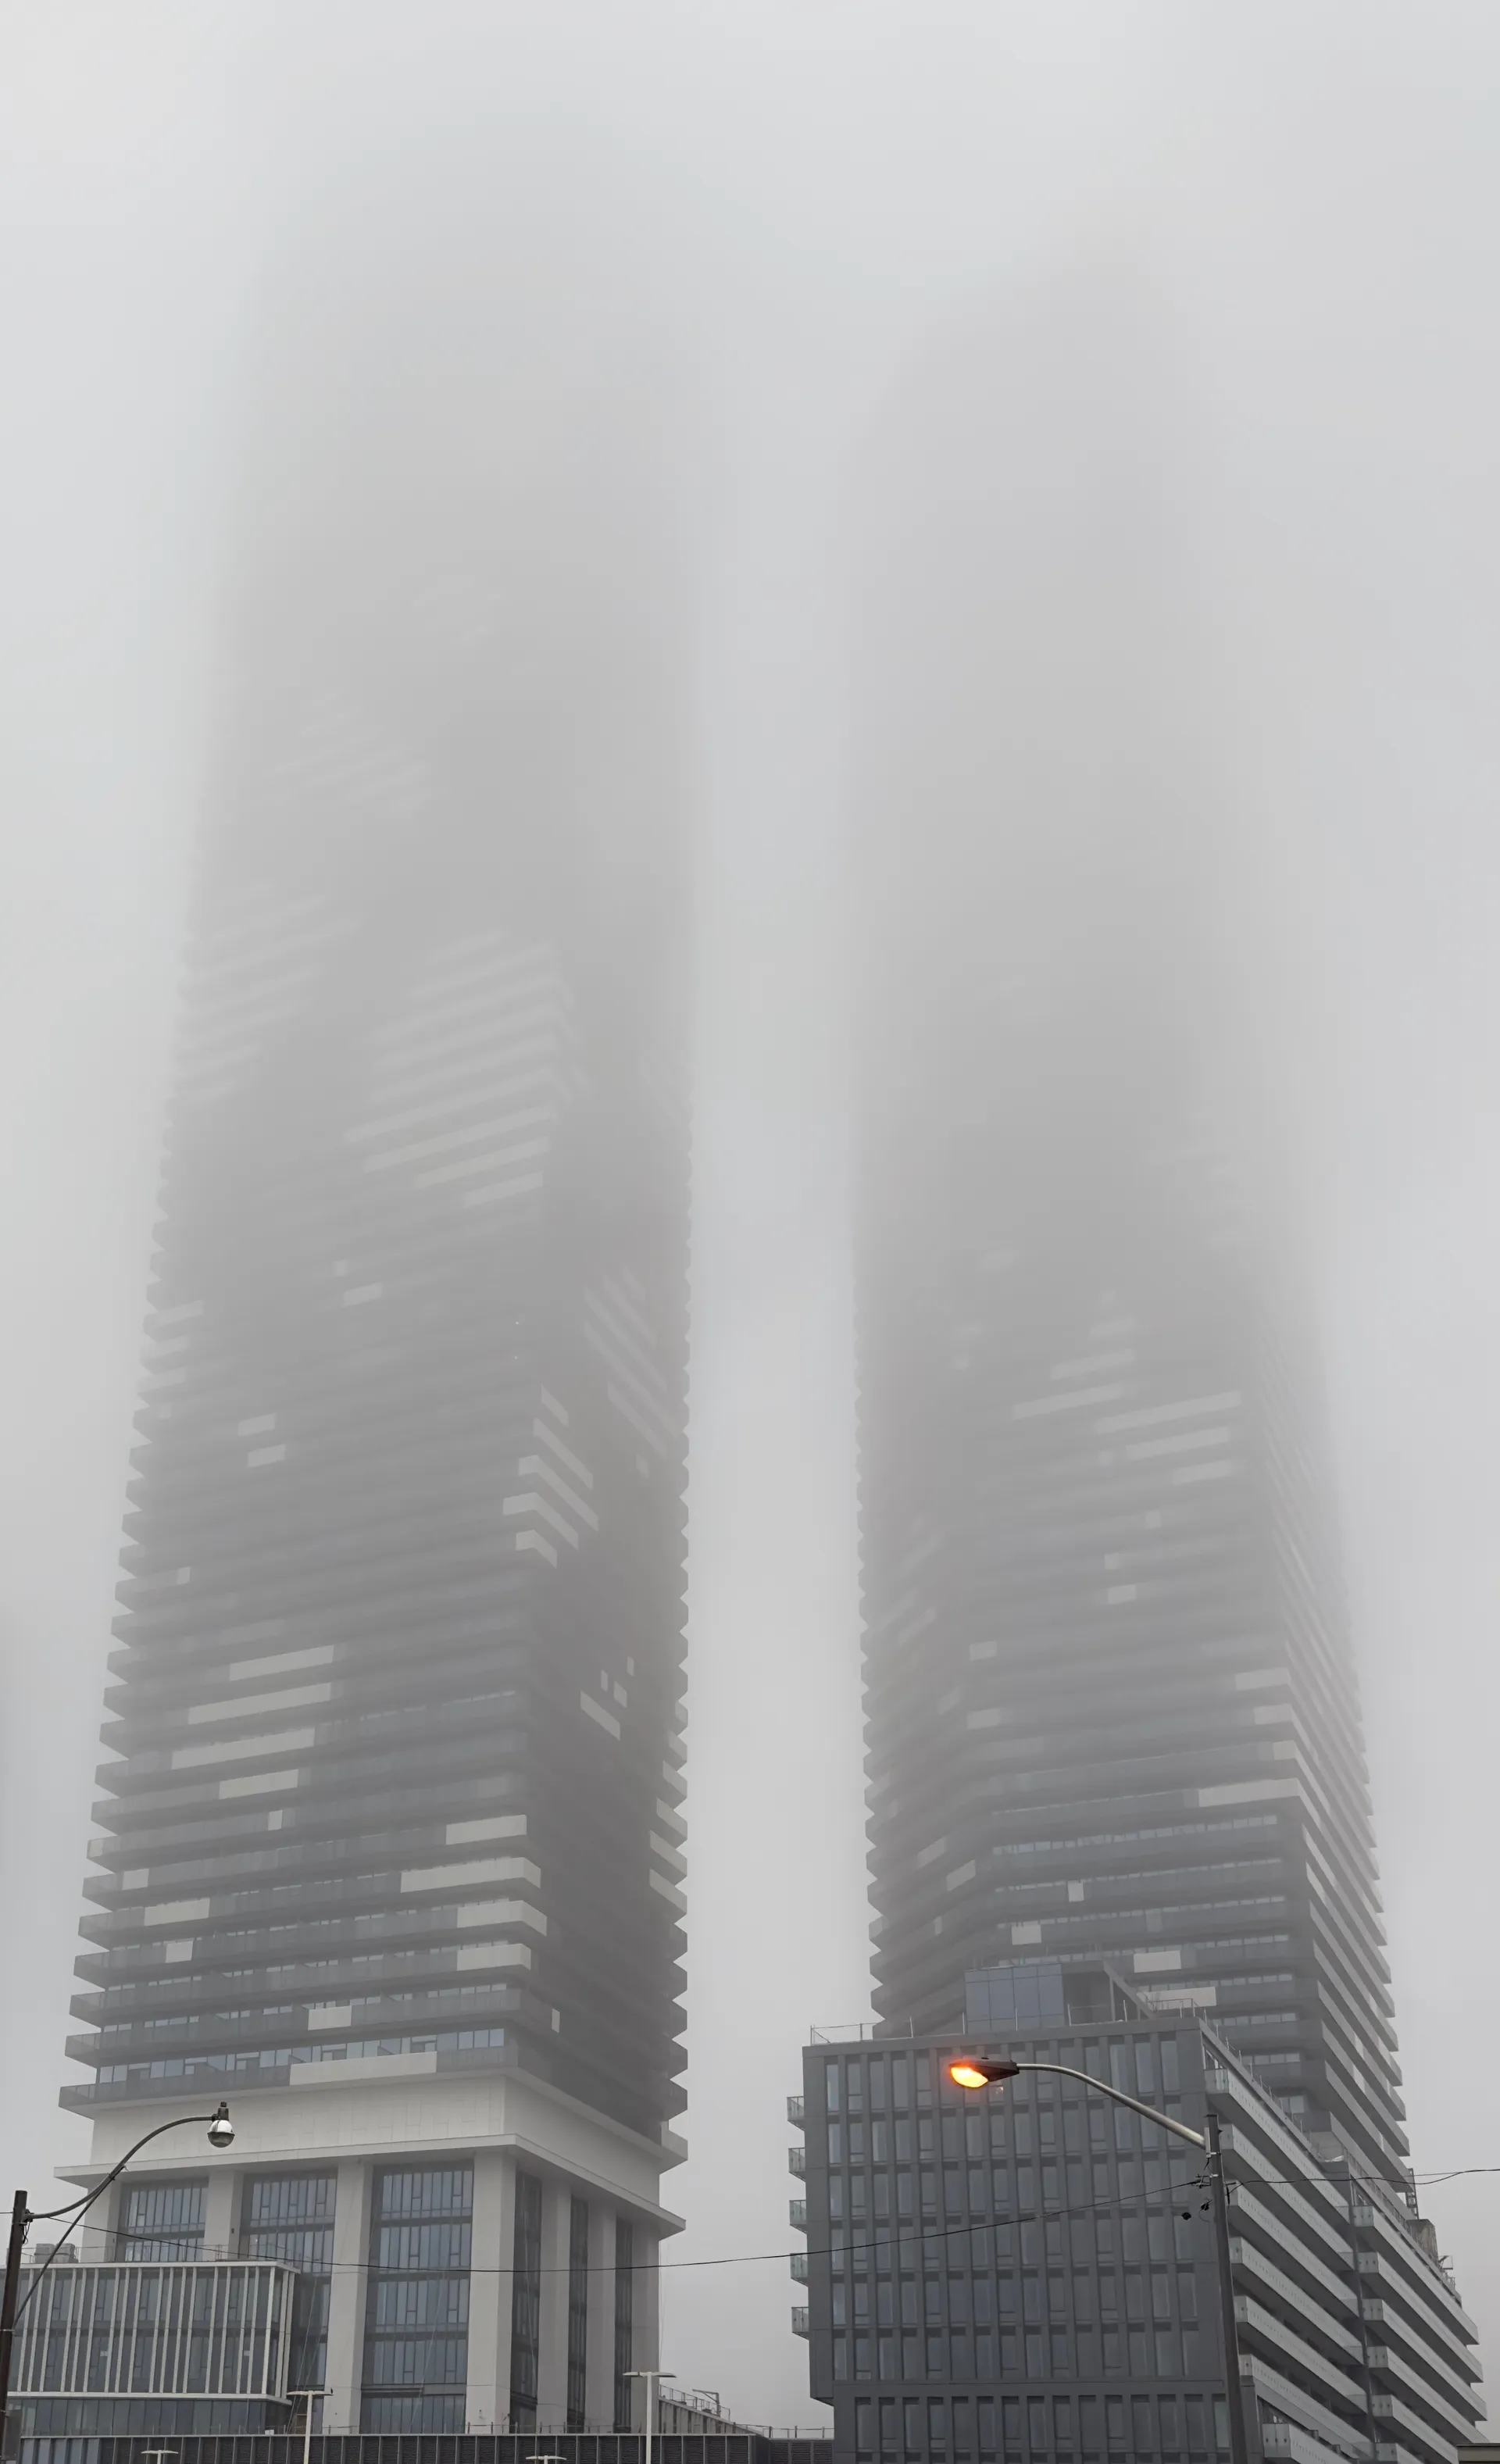 Two residential towers in Toronto disappearing into fog